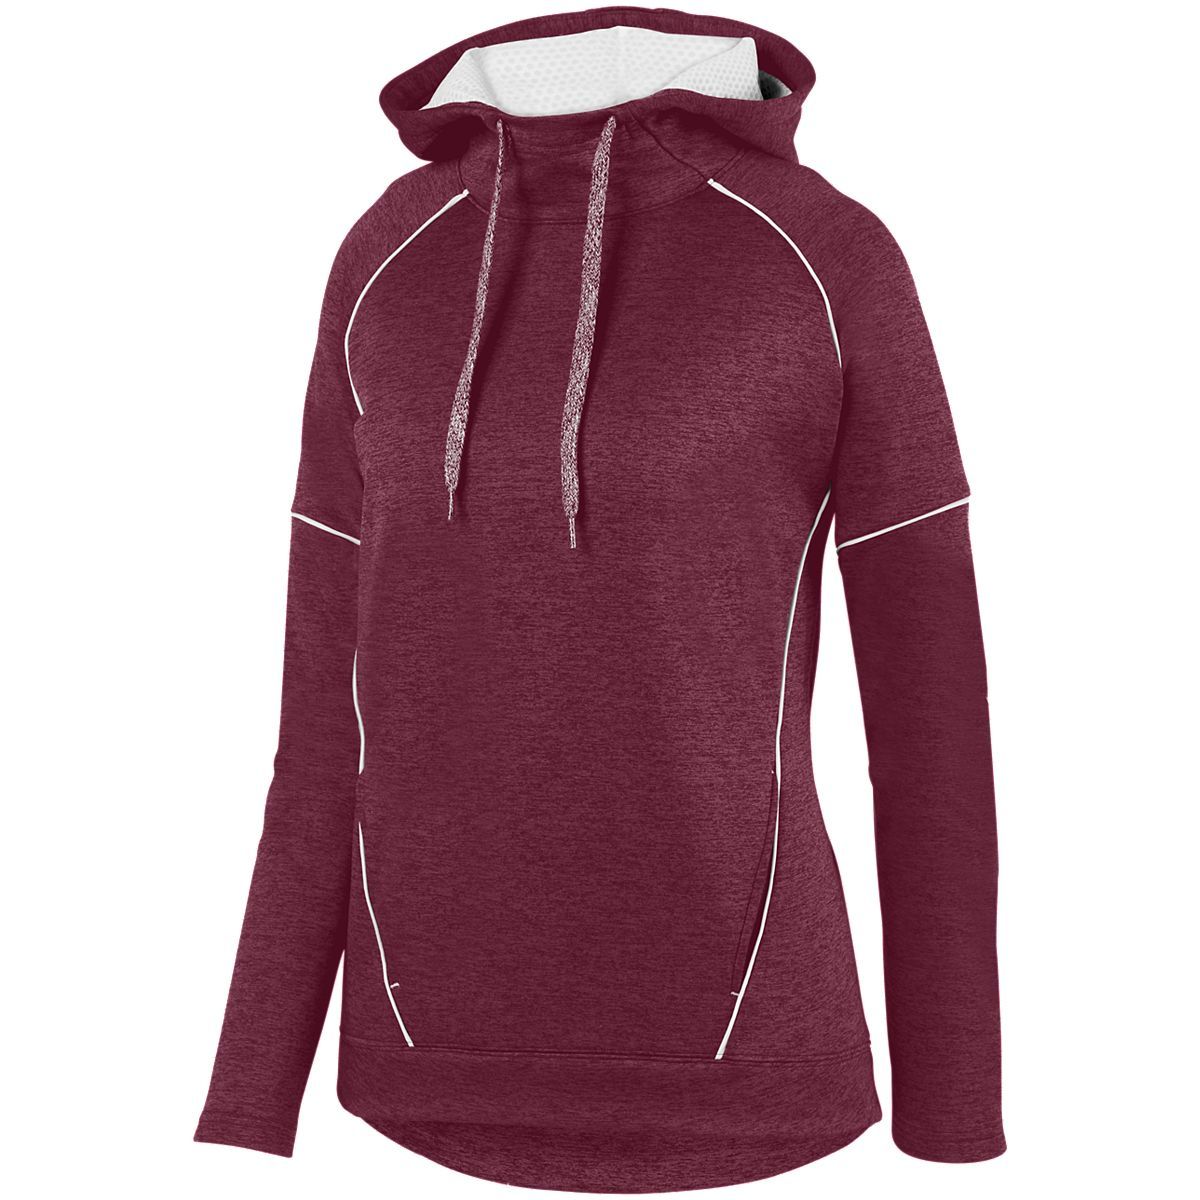 Augusta Sportswear Ladies Zoe Tonal Heather Hoodie in Maroon/White  -Part of the Ladies, Augusta-Products, Shirts, Tonal-Fleece-Collection product lines at KanaleyCreations.com